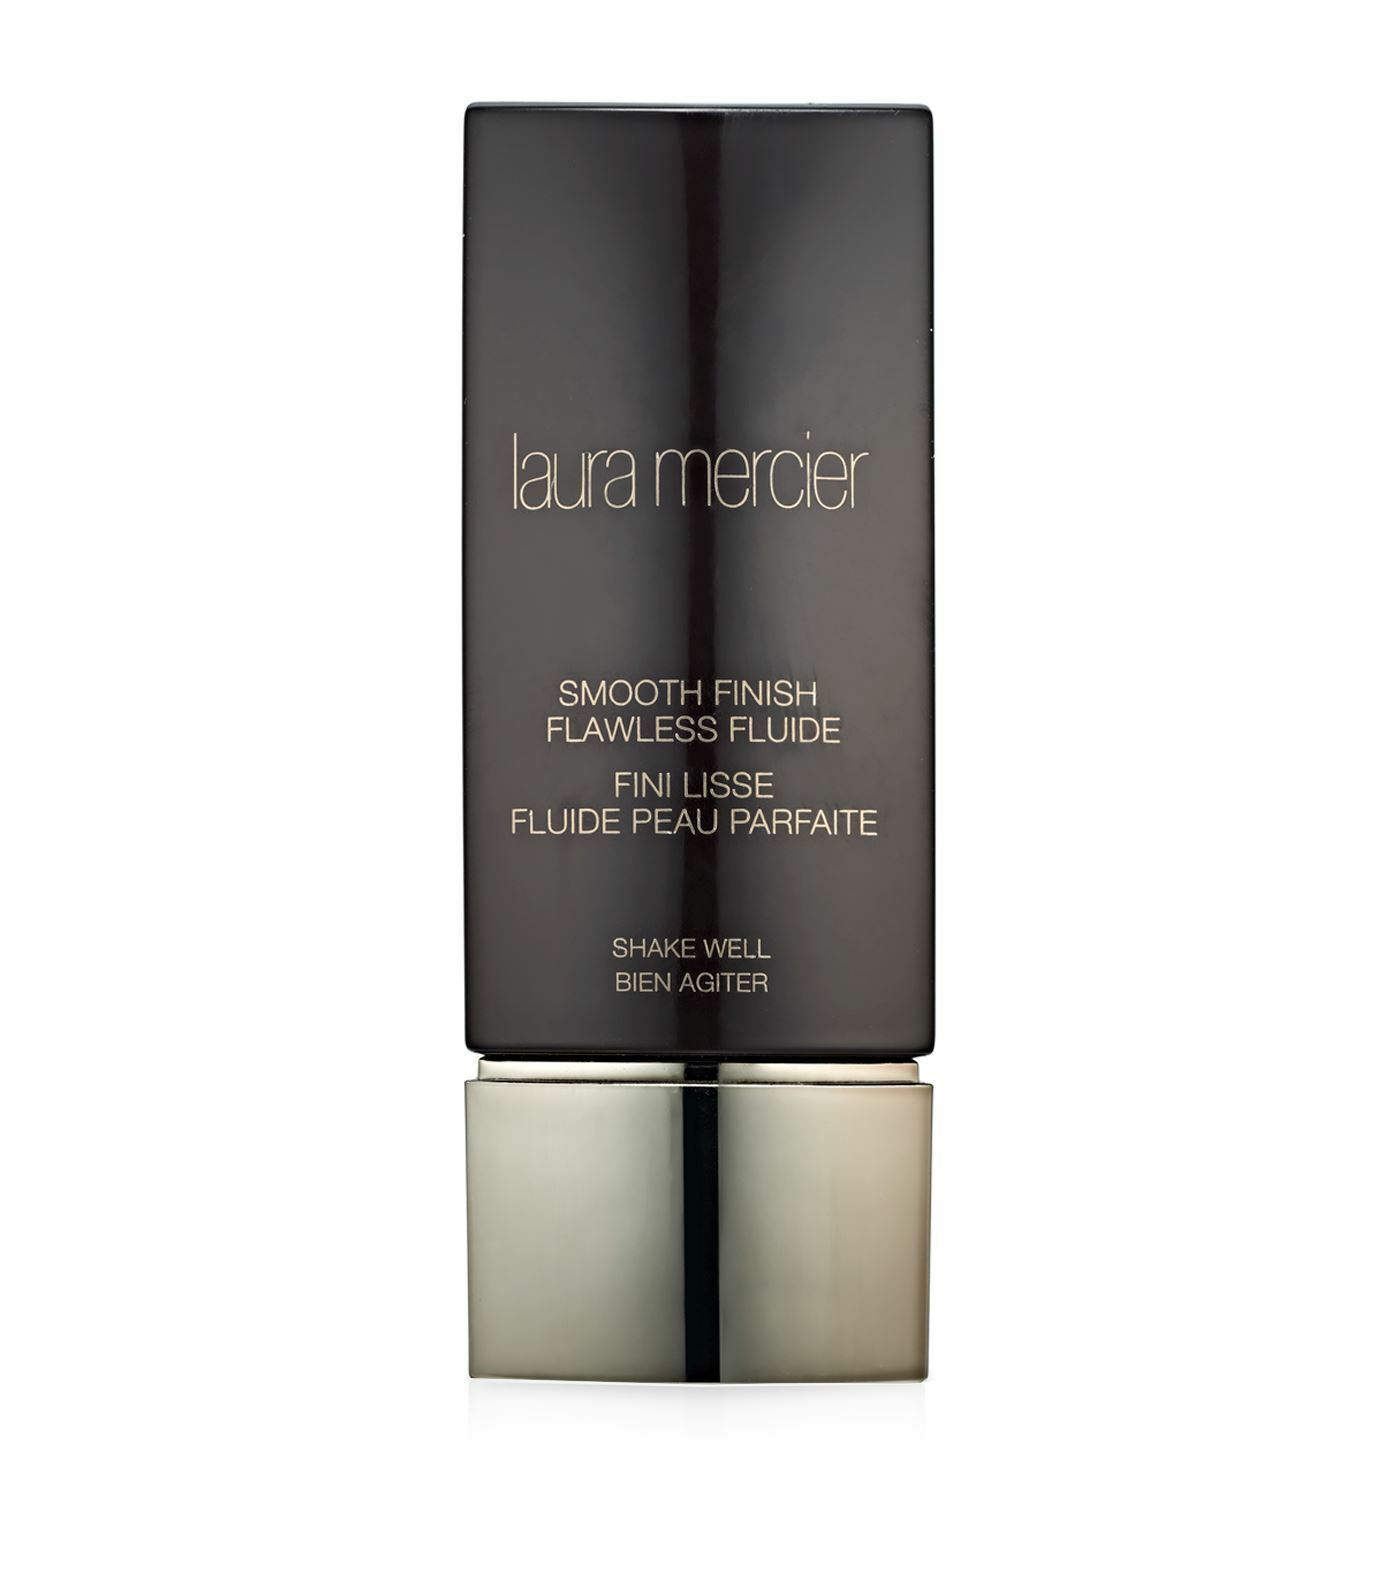 Primary image for Laura Mercier Smooth Finish Flawless Fluide Size: 30ml/1oz Color: Golden